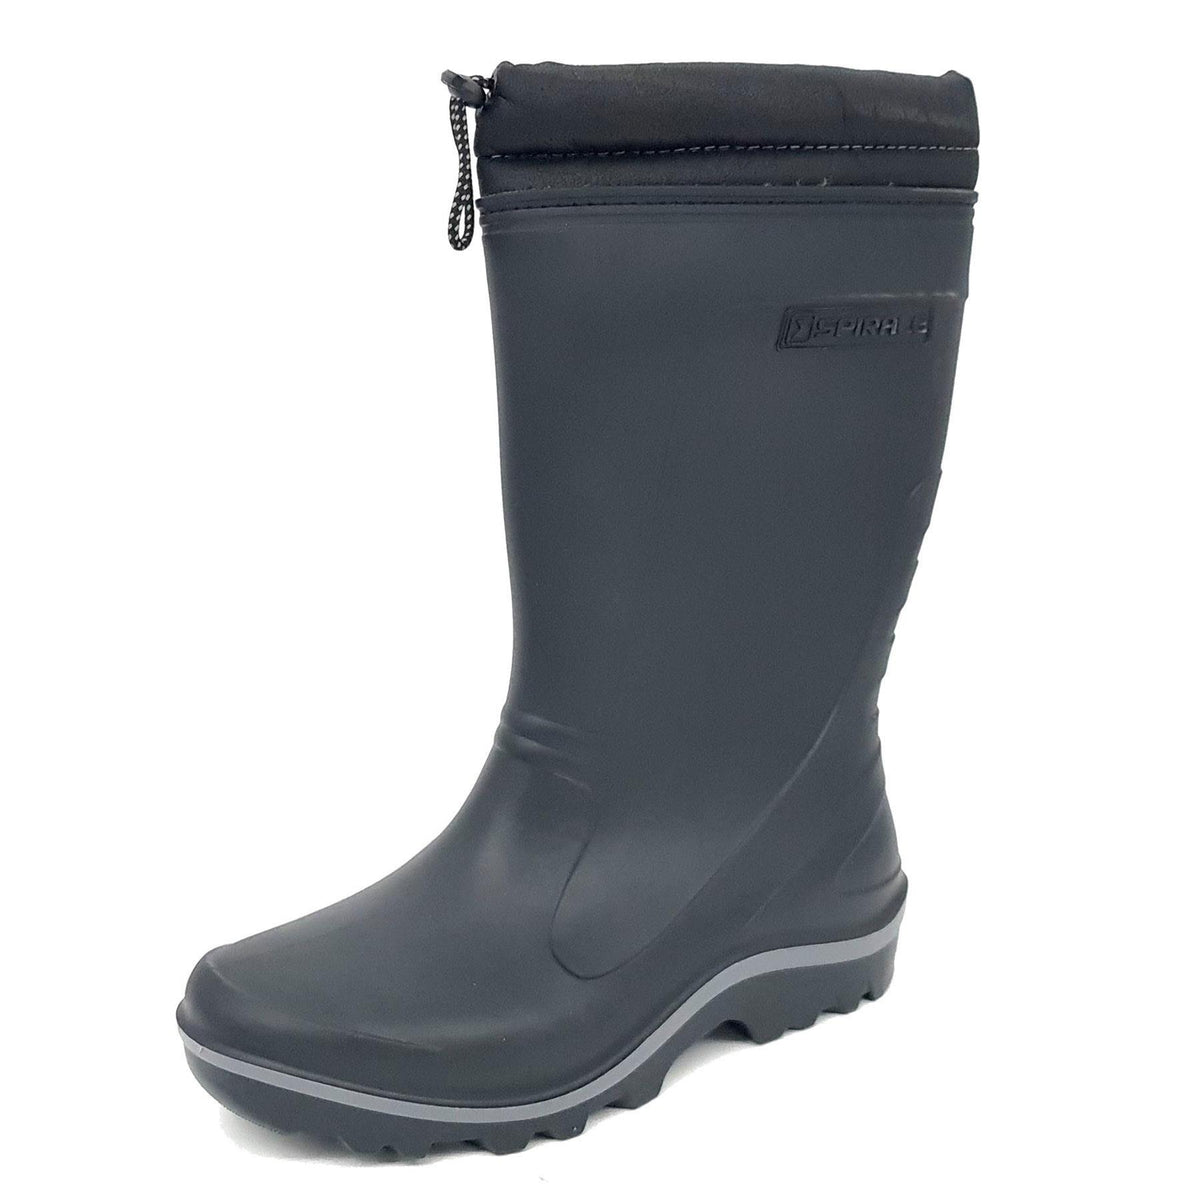 Spirale Stratos Fleece Lined Thermal Wellington Boots